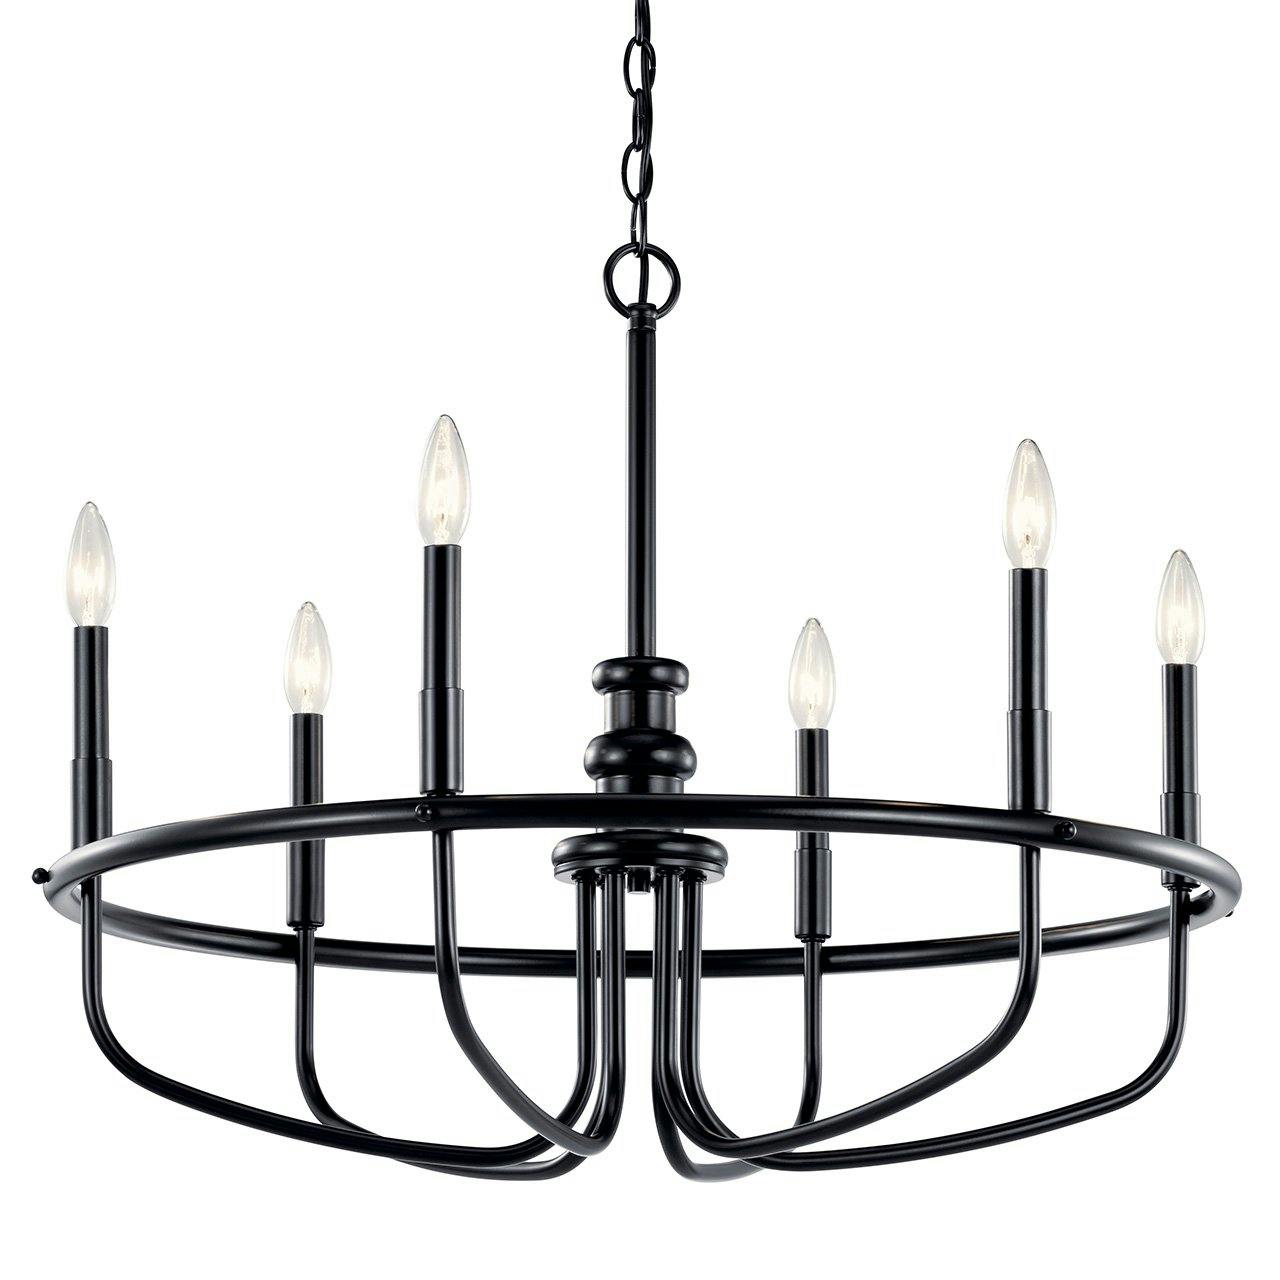 Capitol Hill 22" 6 Light Chandelier Black without the canopy on a white background